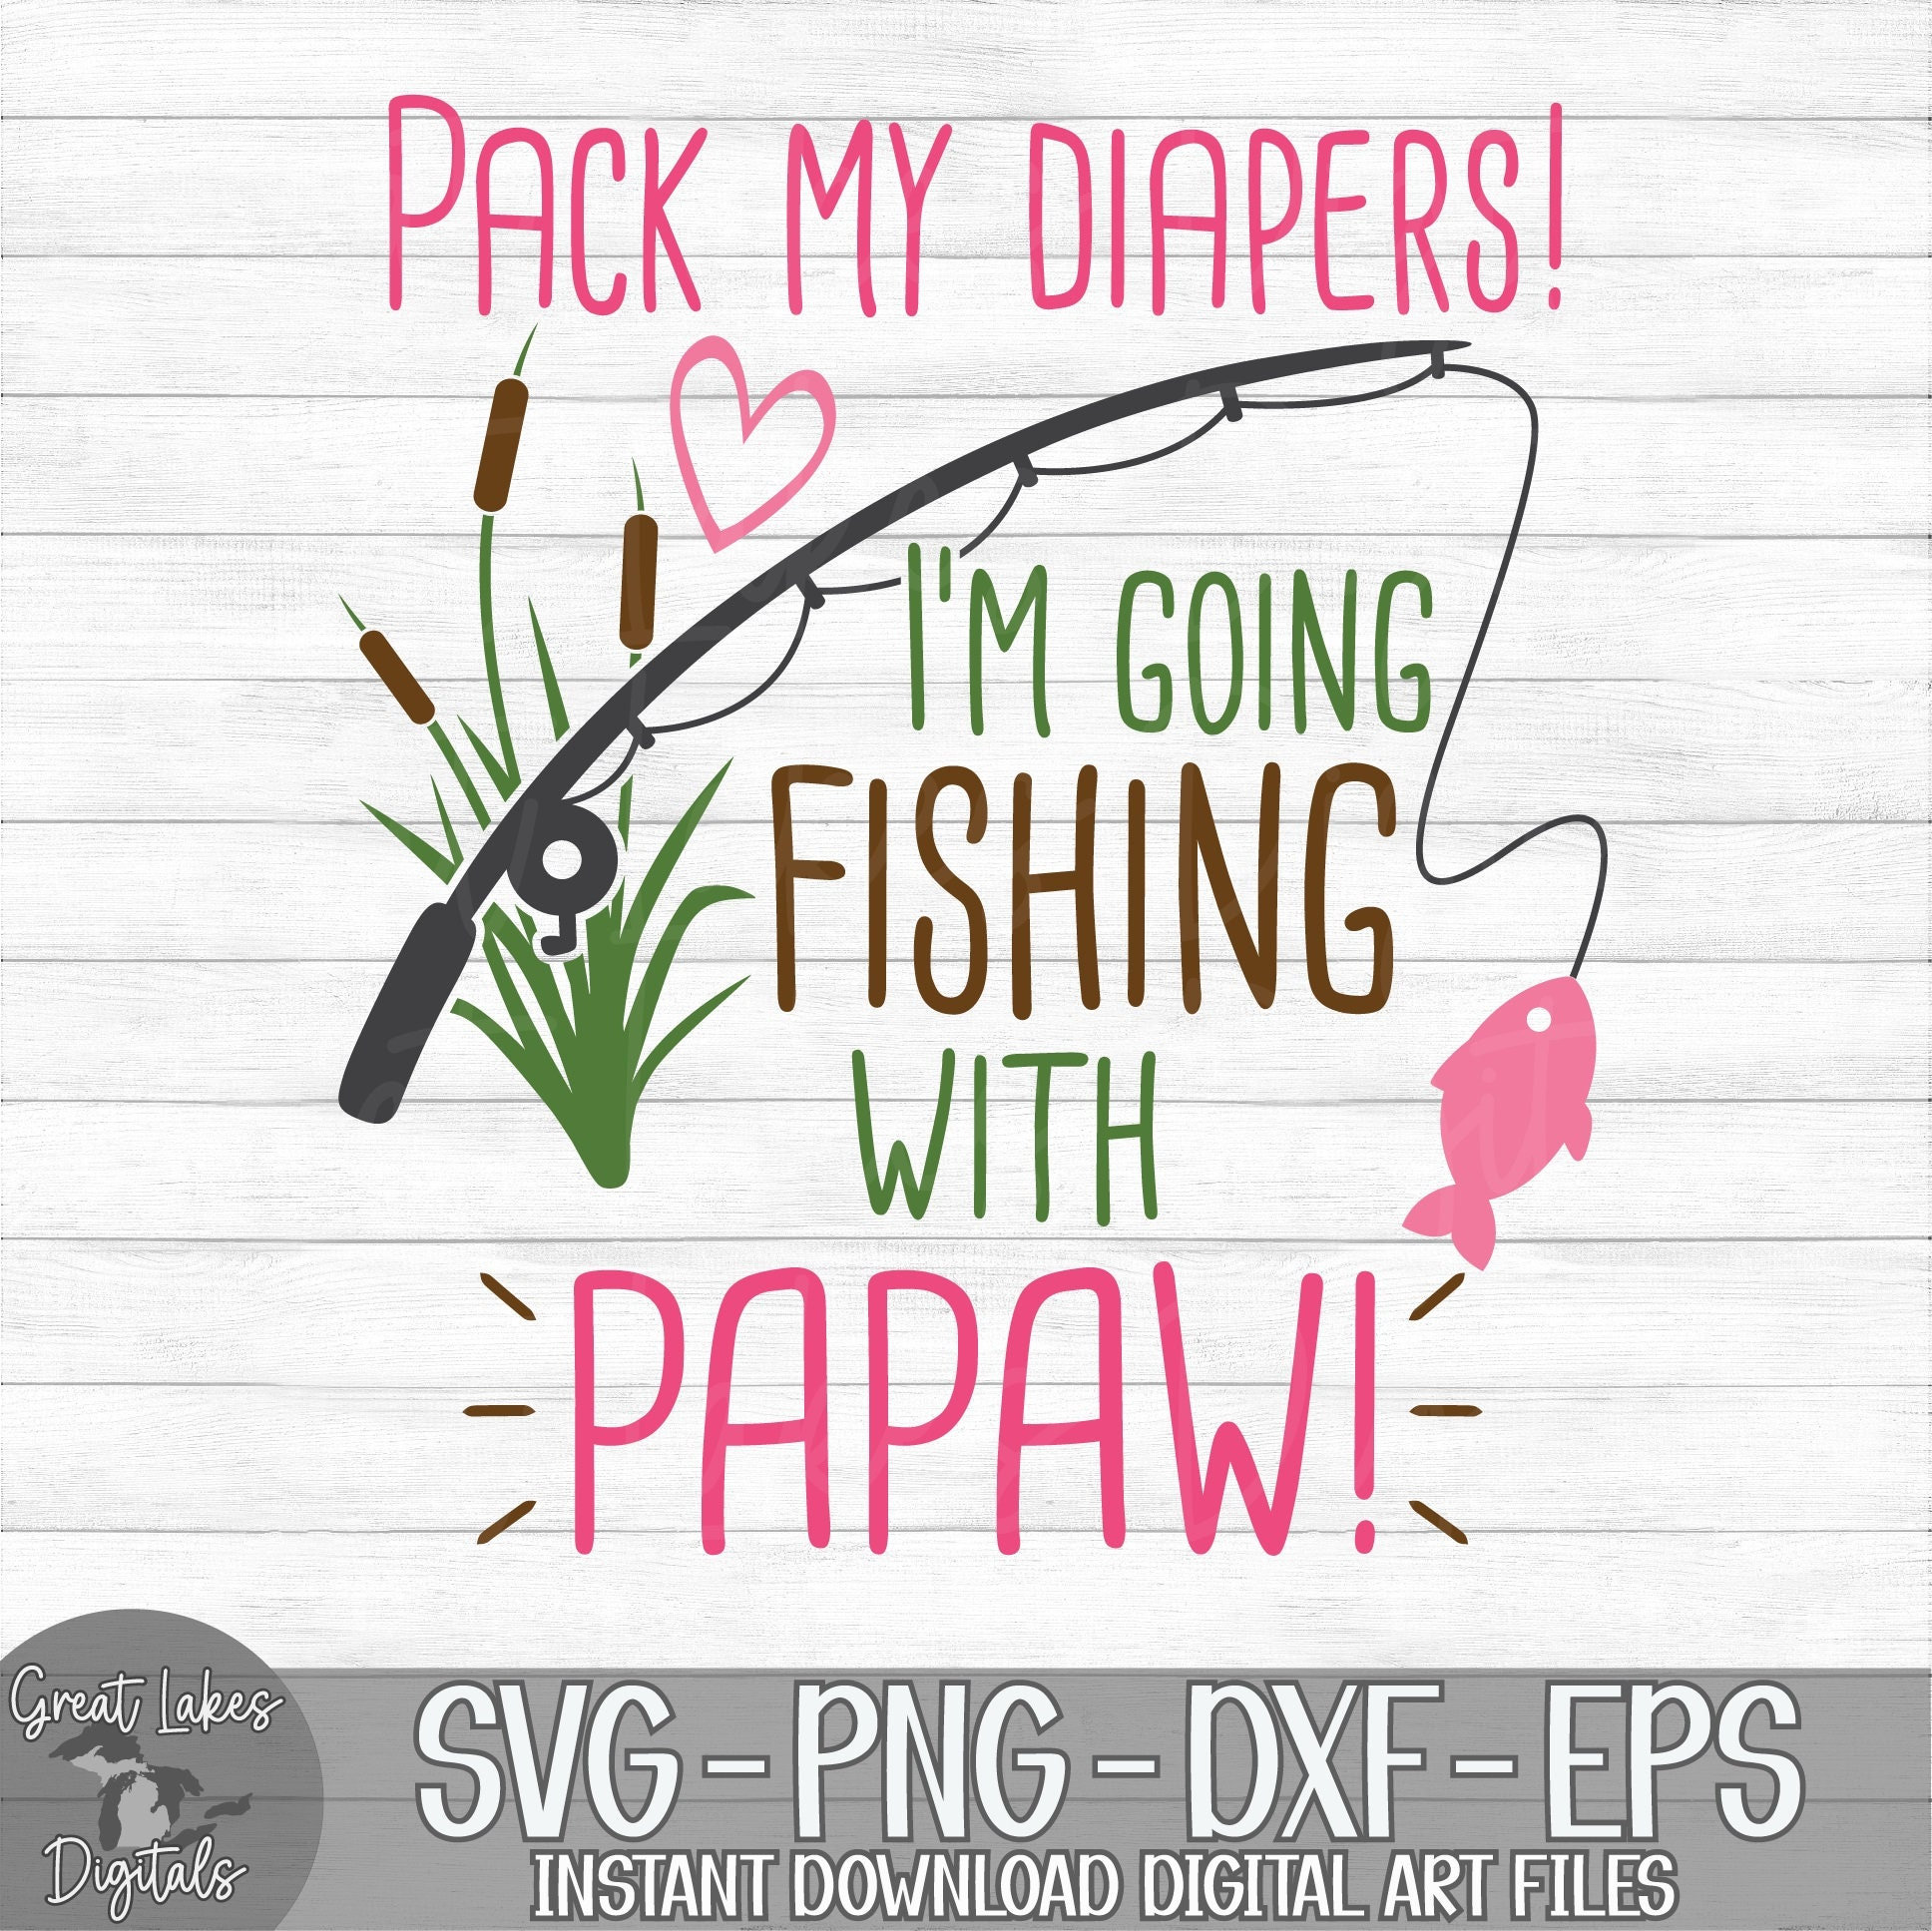 Pack My Diapers I'm Going Fishing With Papaw Instant Digital